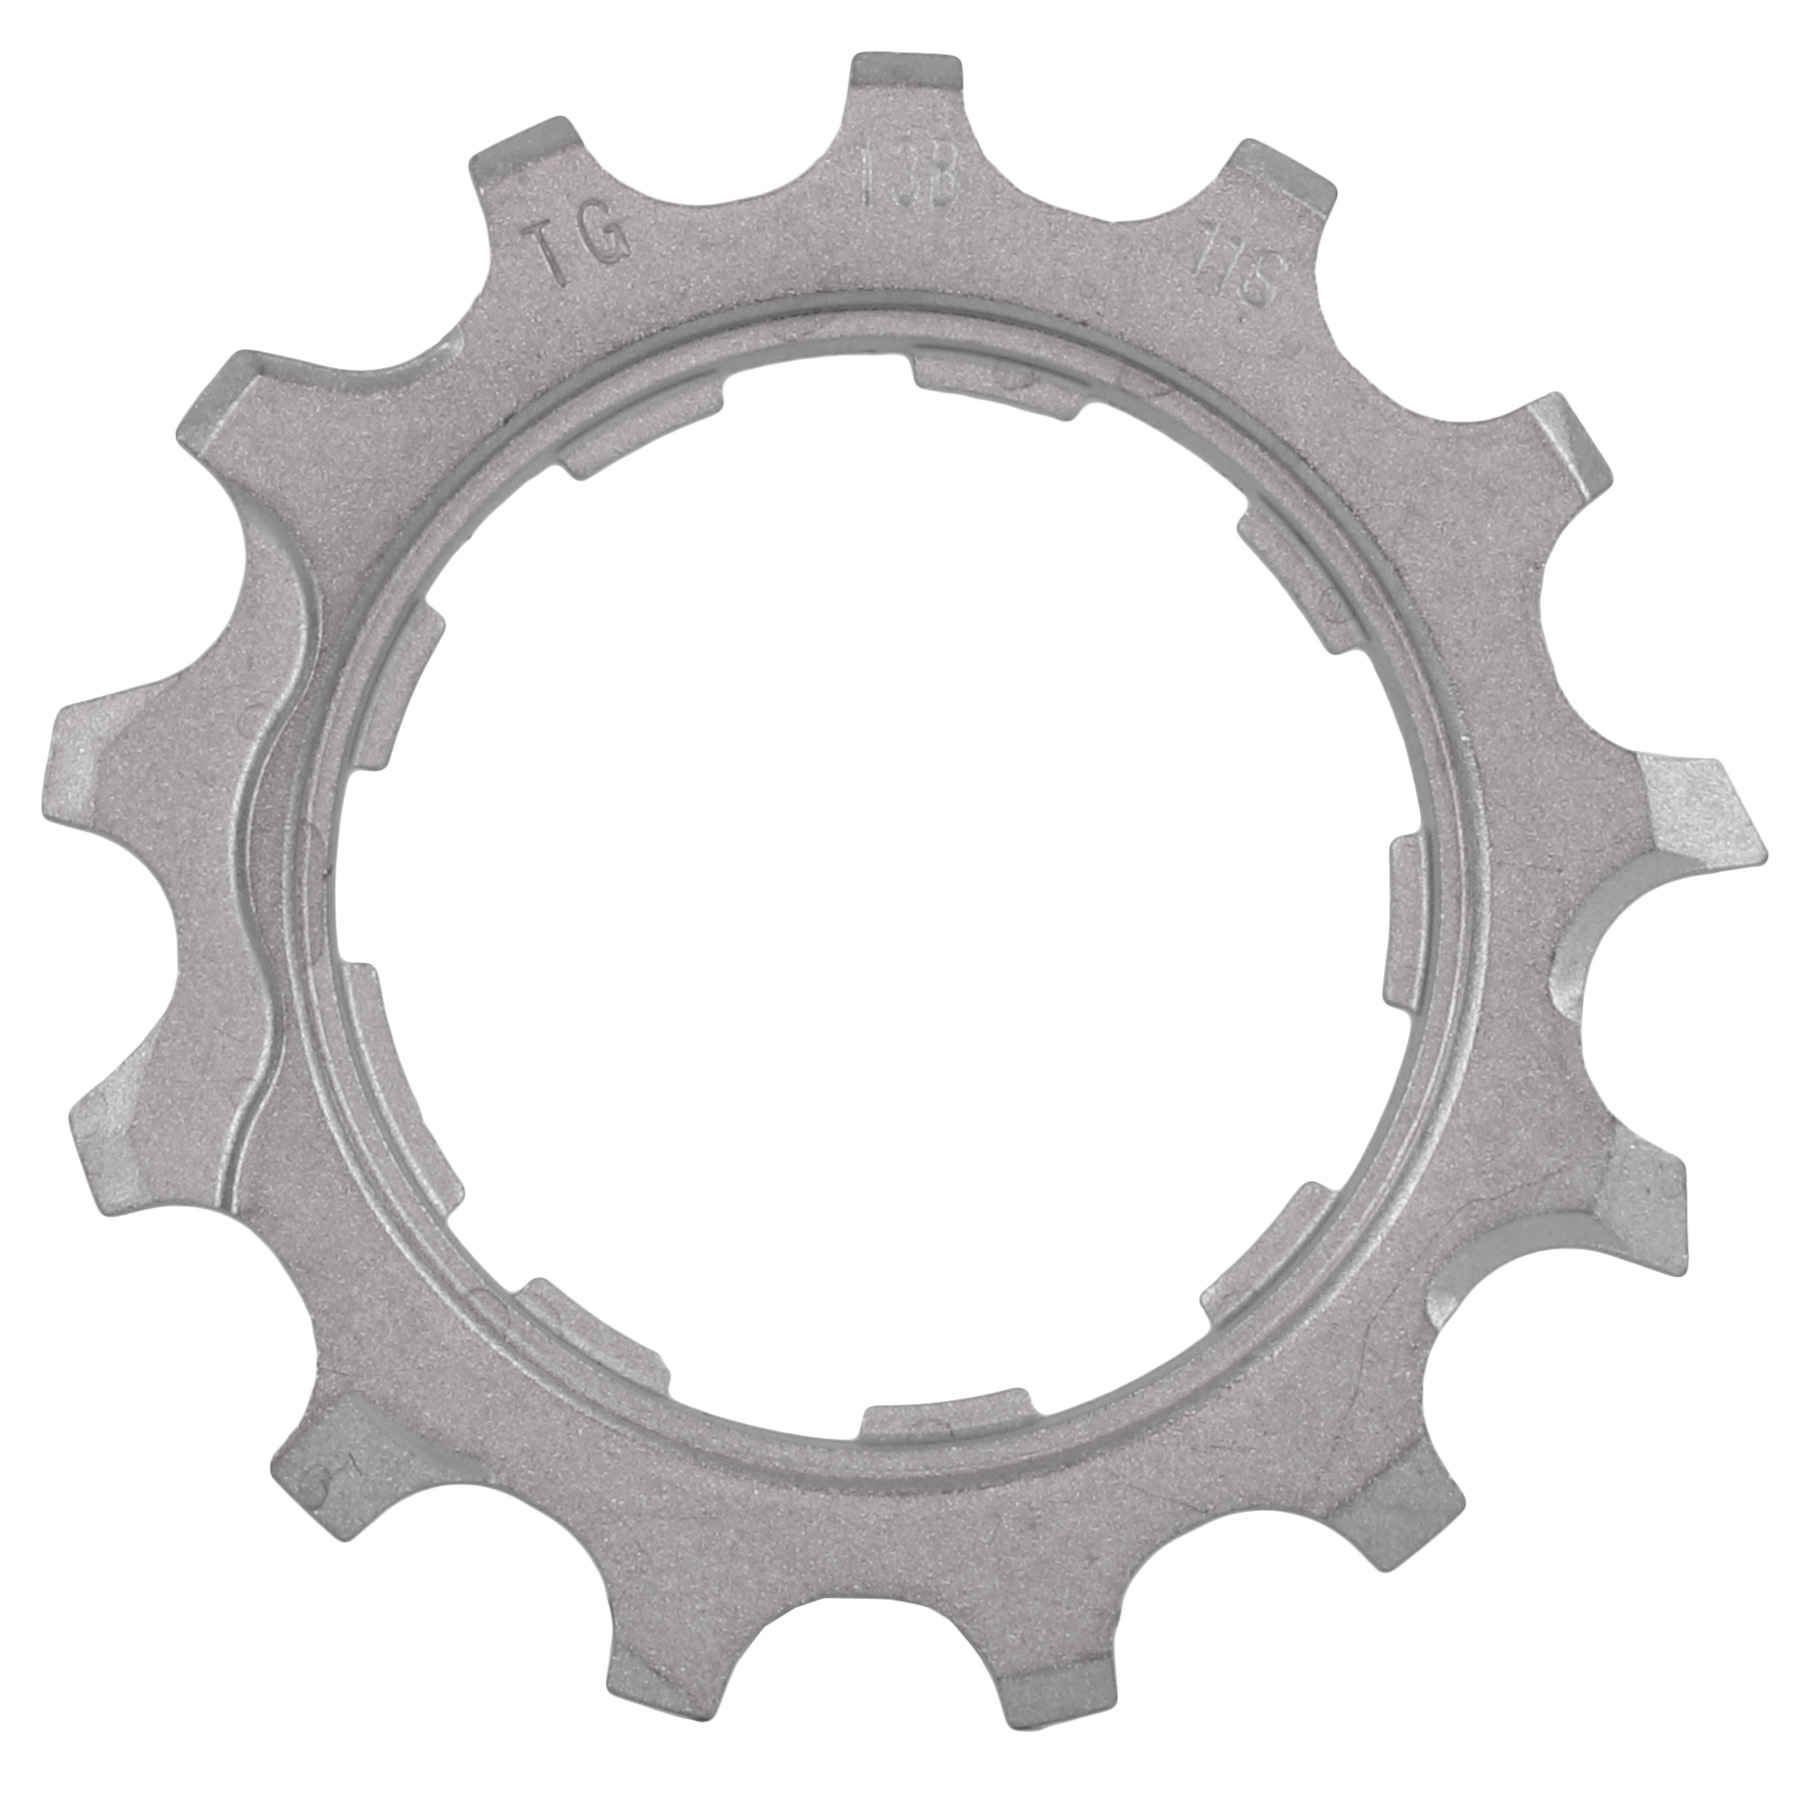 Picture of Shimano Sprocket for Dura Ace 11-Speed Cassette - 13 T for 12-25/28 (Y1YC13100) - CS-R9100 / CS-9000